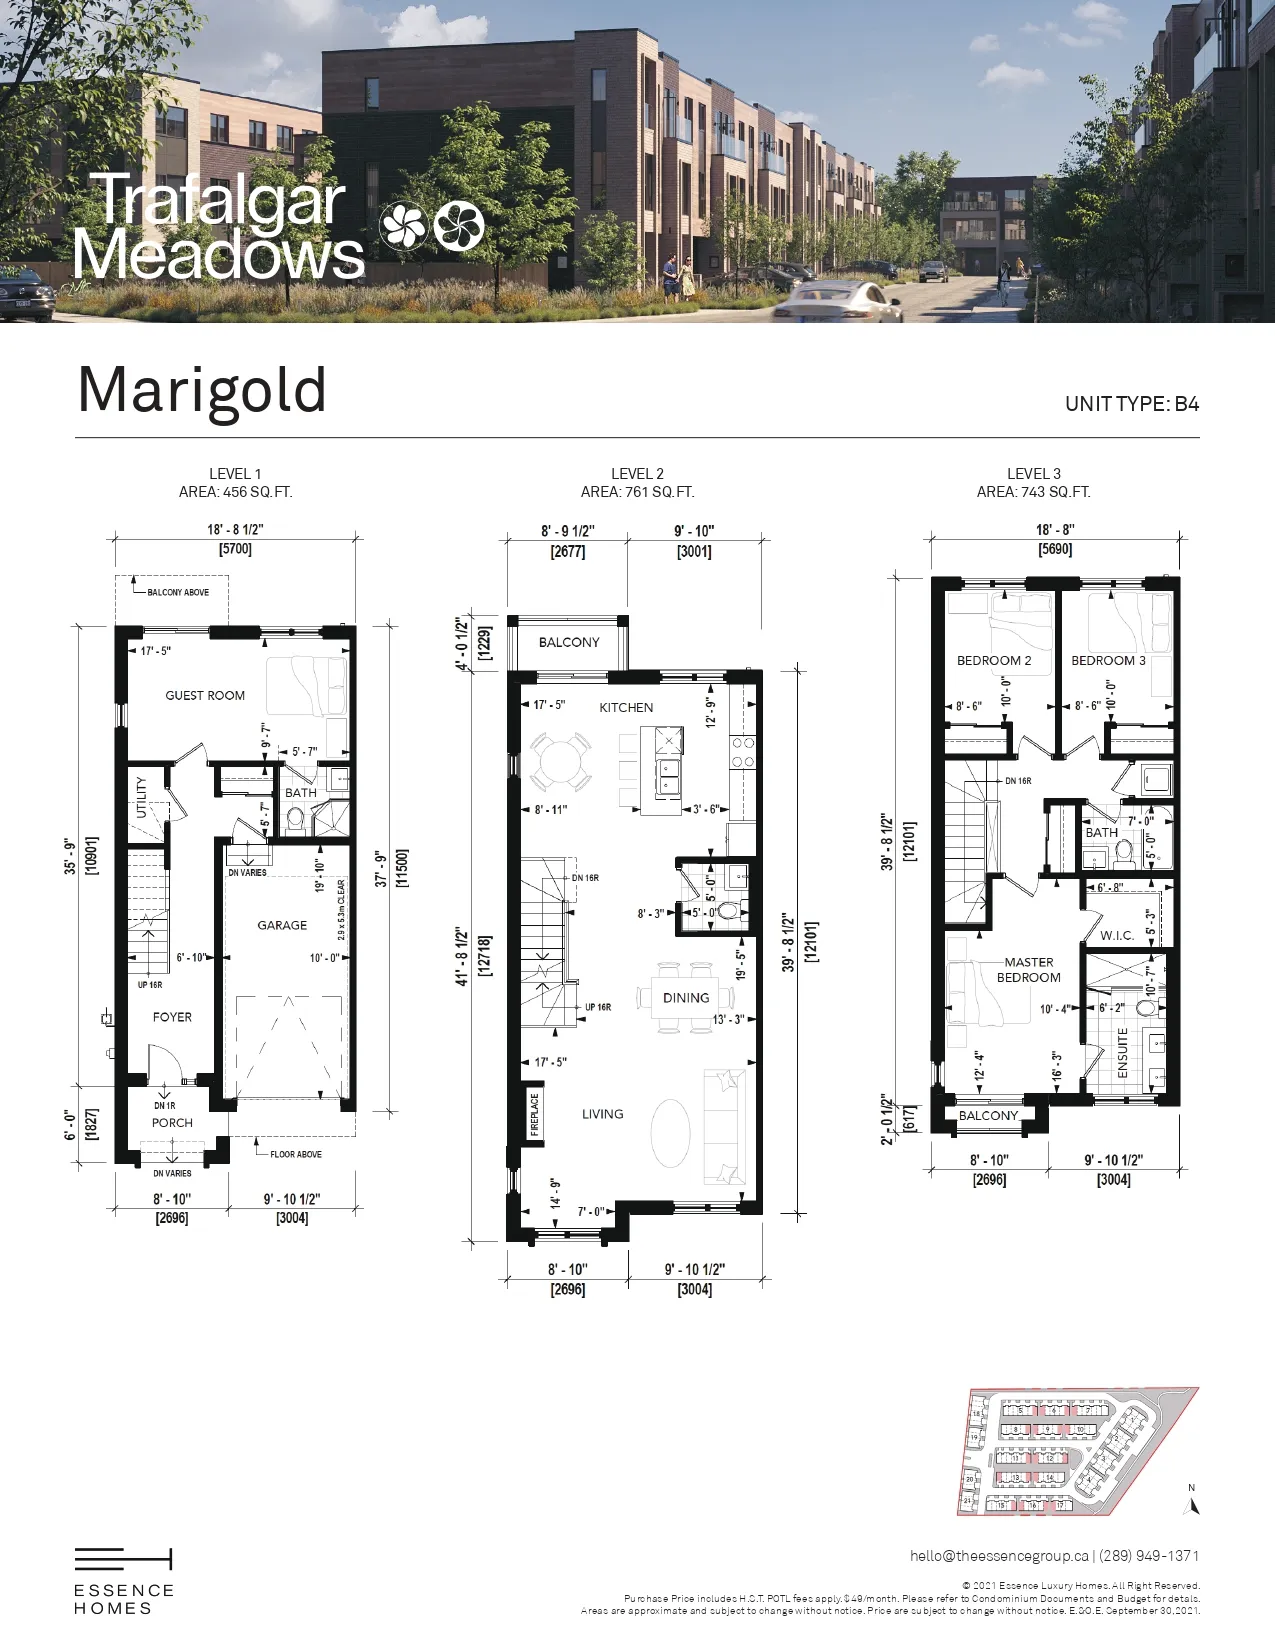  Floor Plan of Trafalgar Meadows with undefined beds